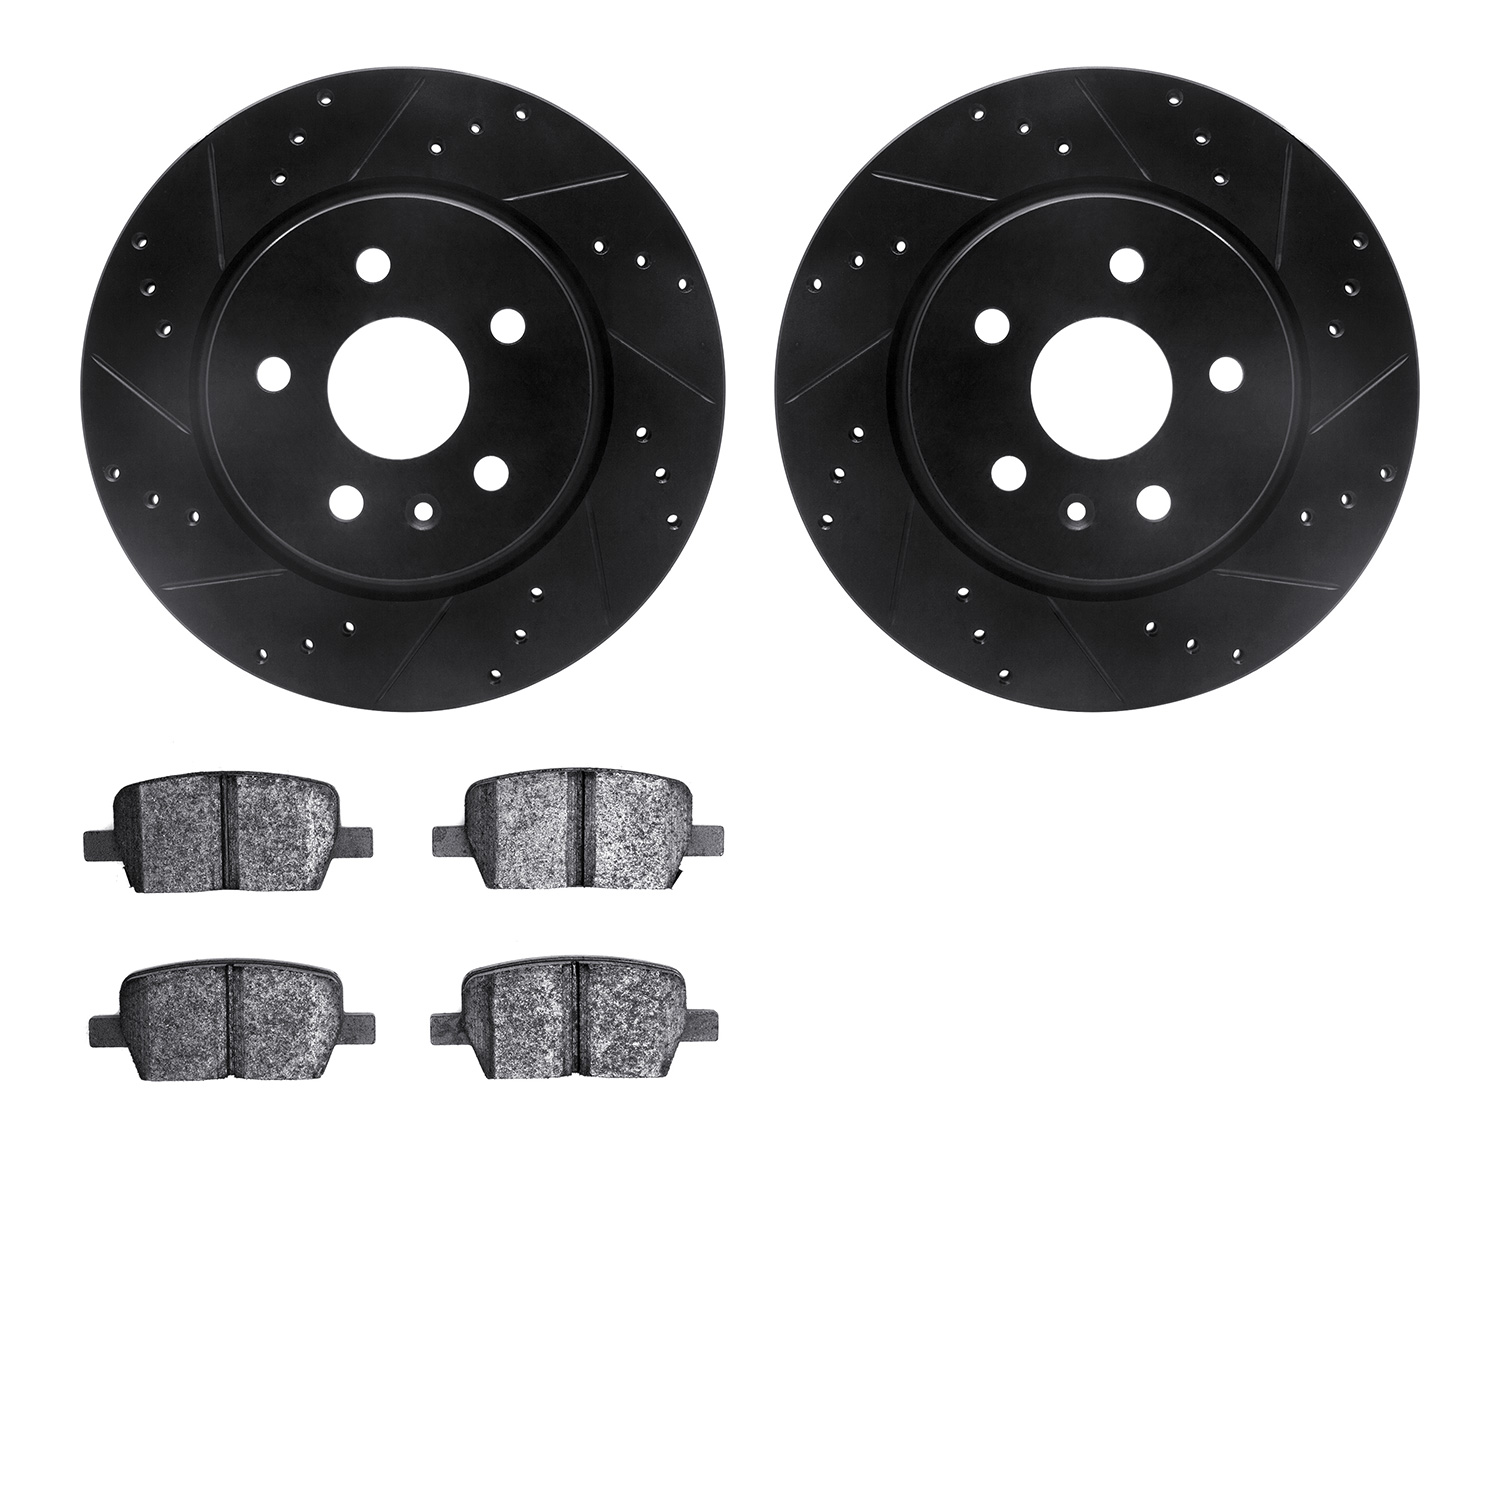 8302-65026 Drilled/Slotted Brake Rotors with 3000-Series Ceramic Brake Pads Kit [Black], Fits Select GM, Position: Rear